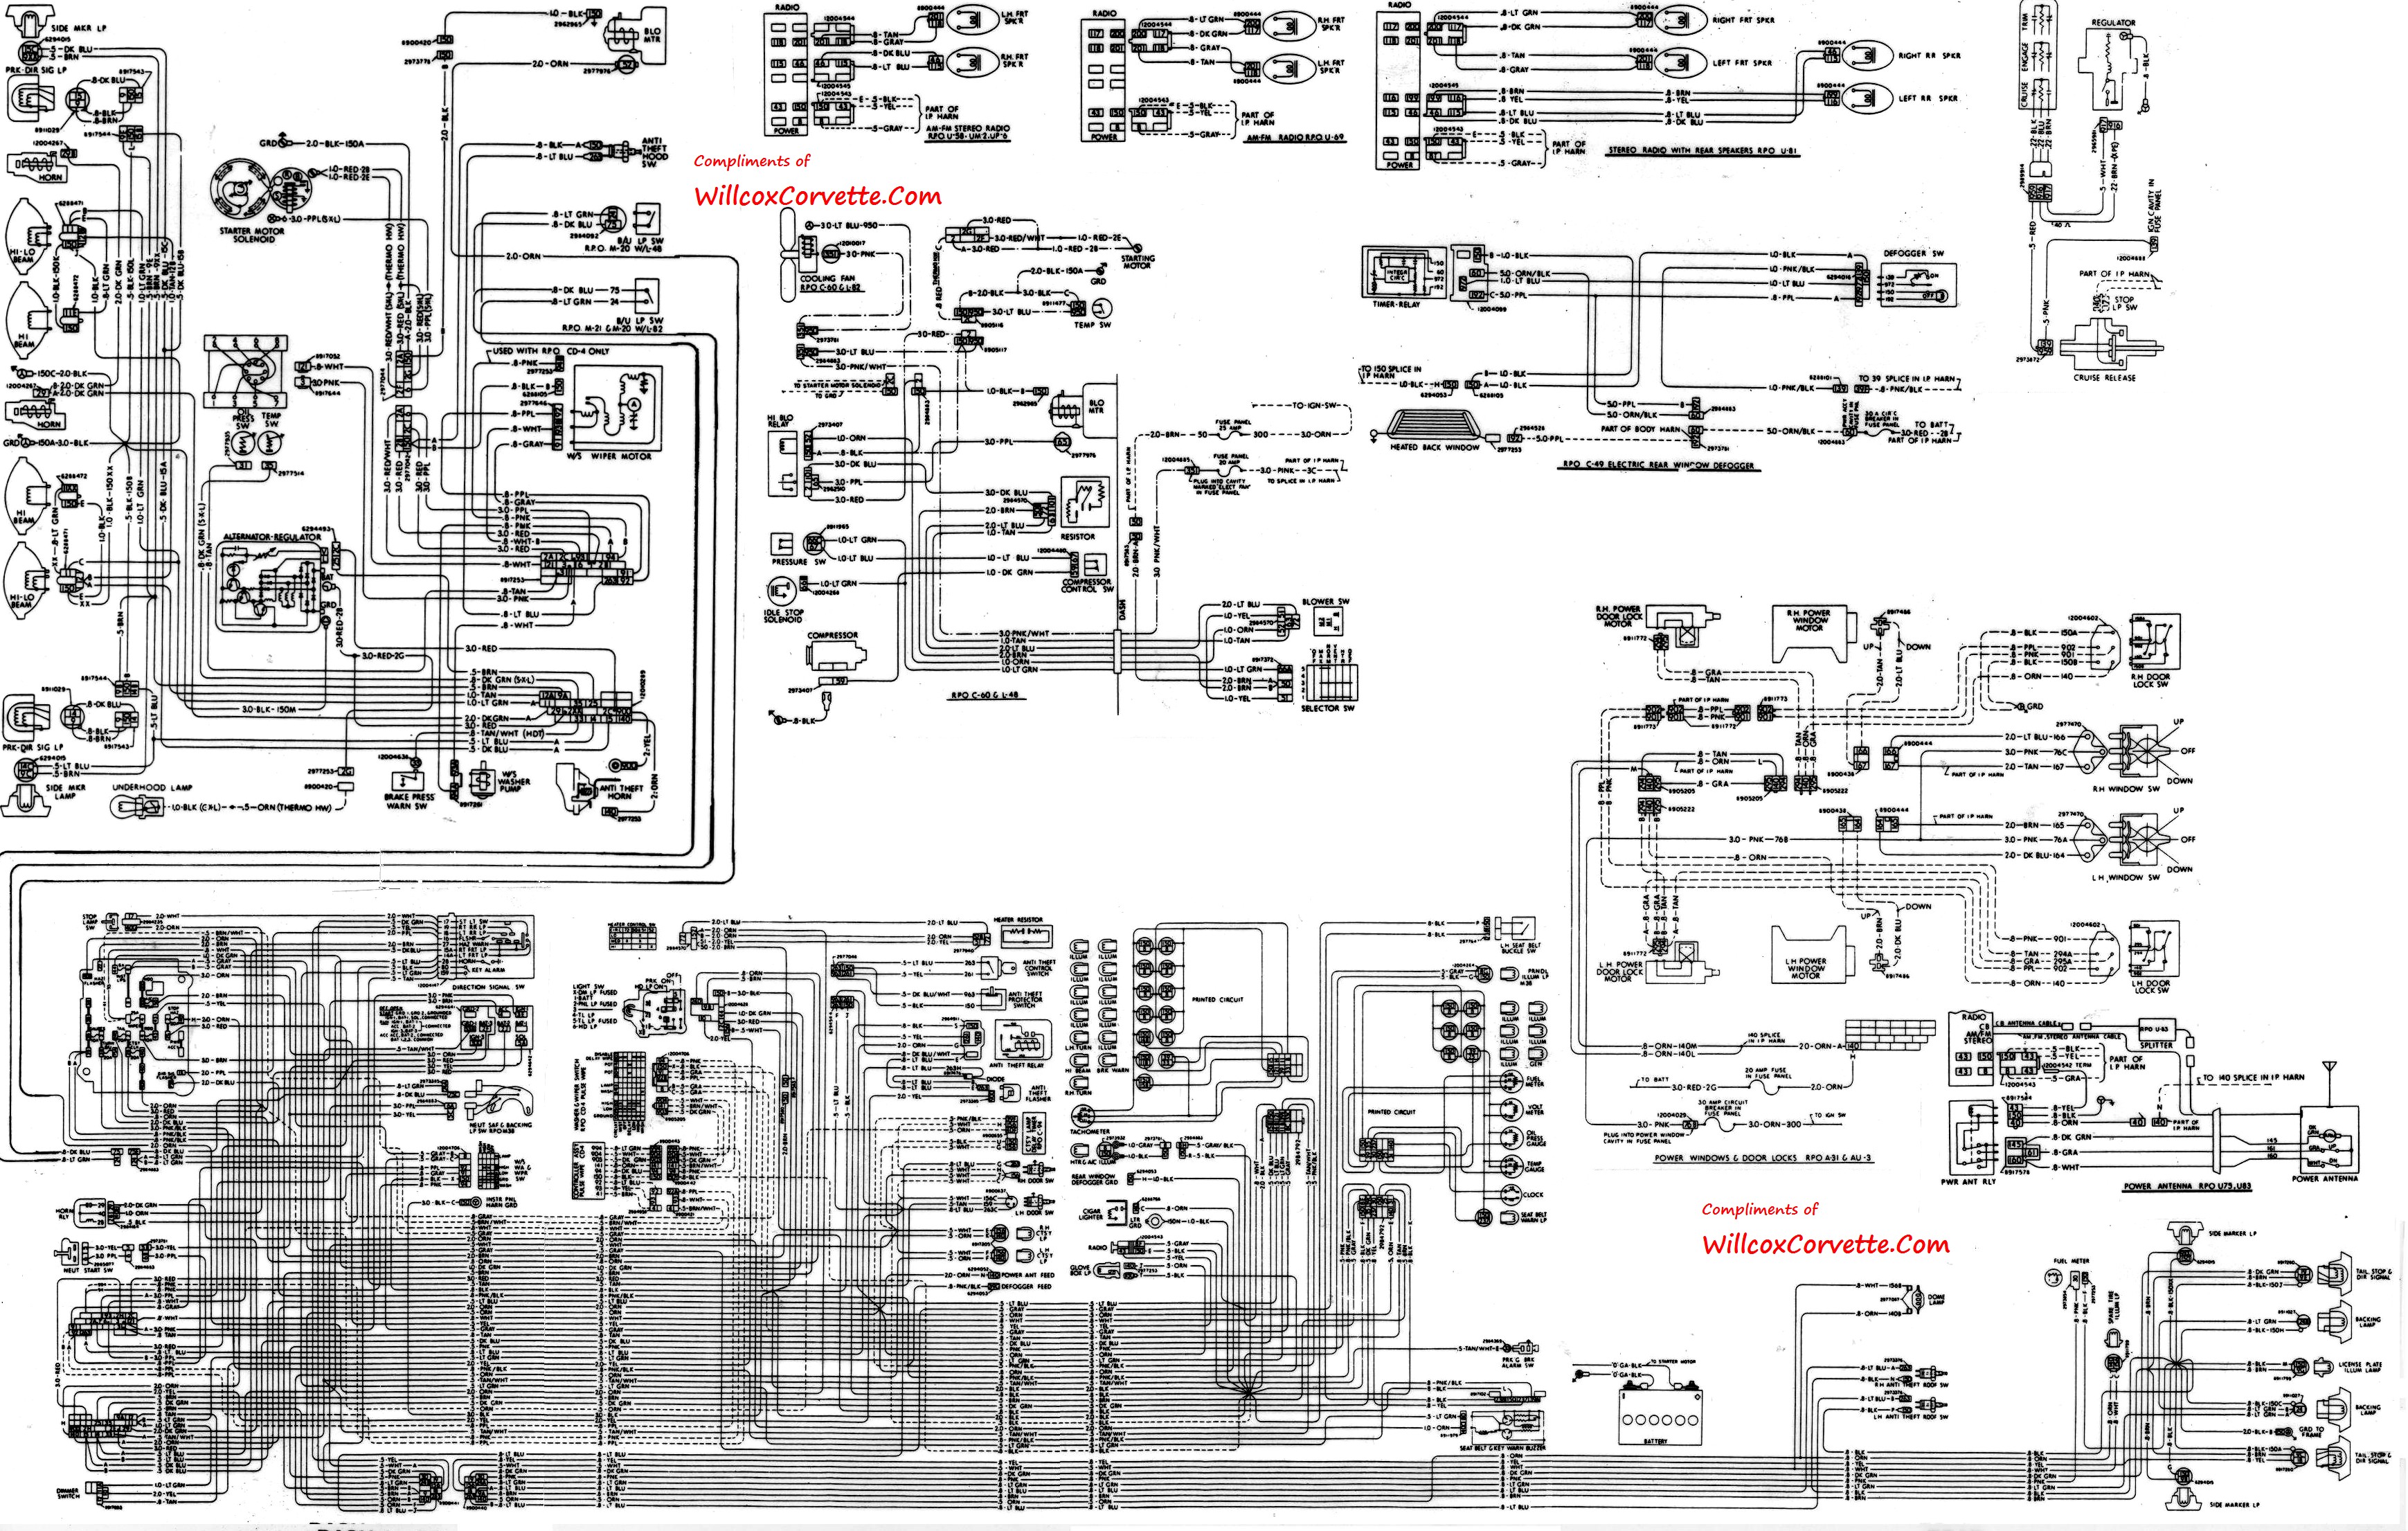 Simple Electrical Wiring Diagrams Chevrolet Corvette 1974 Plete Electrical Wiring Diagram In for